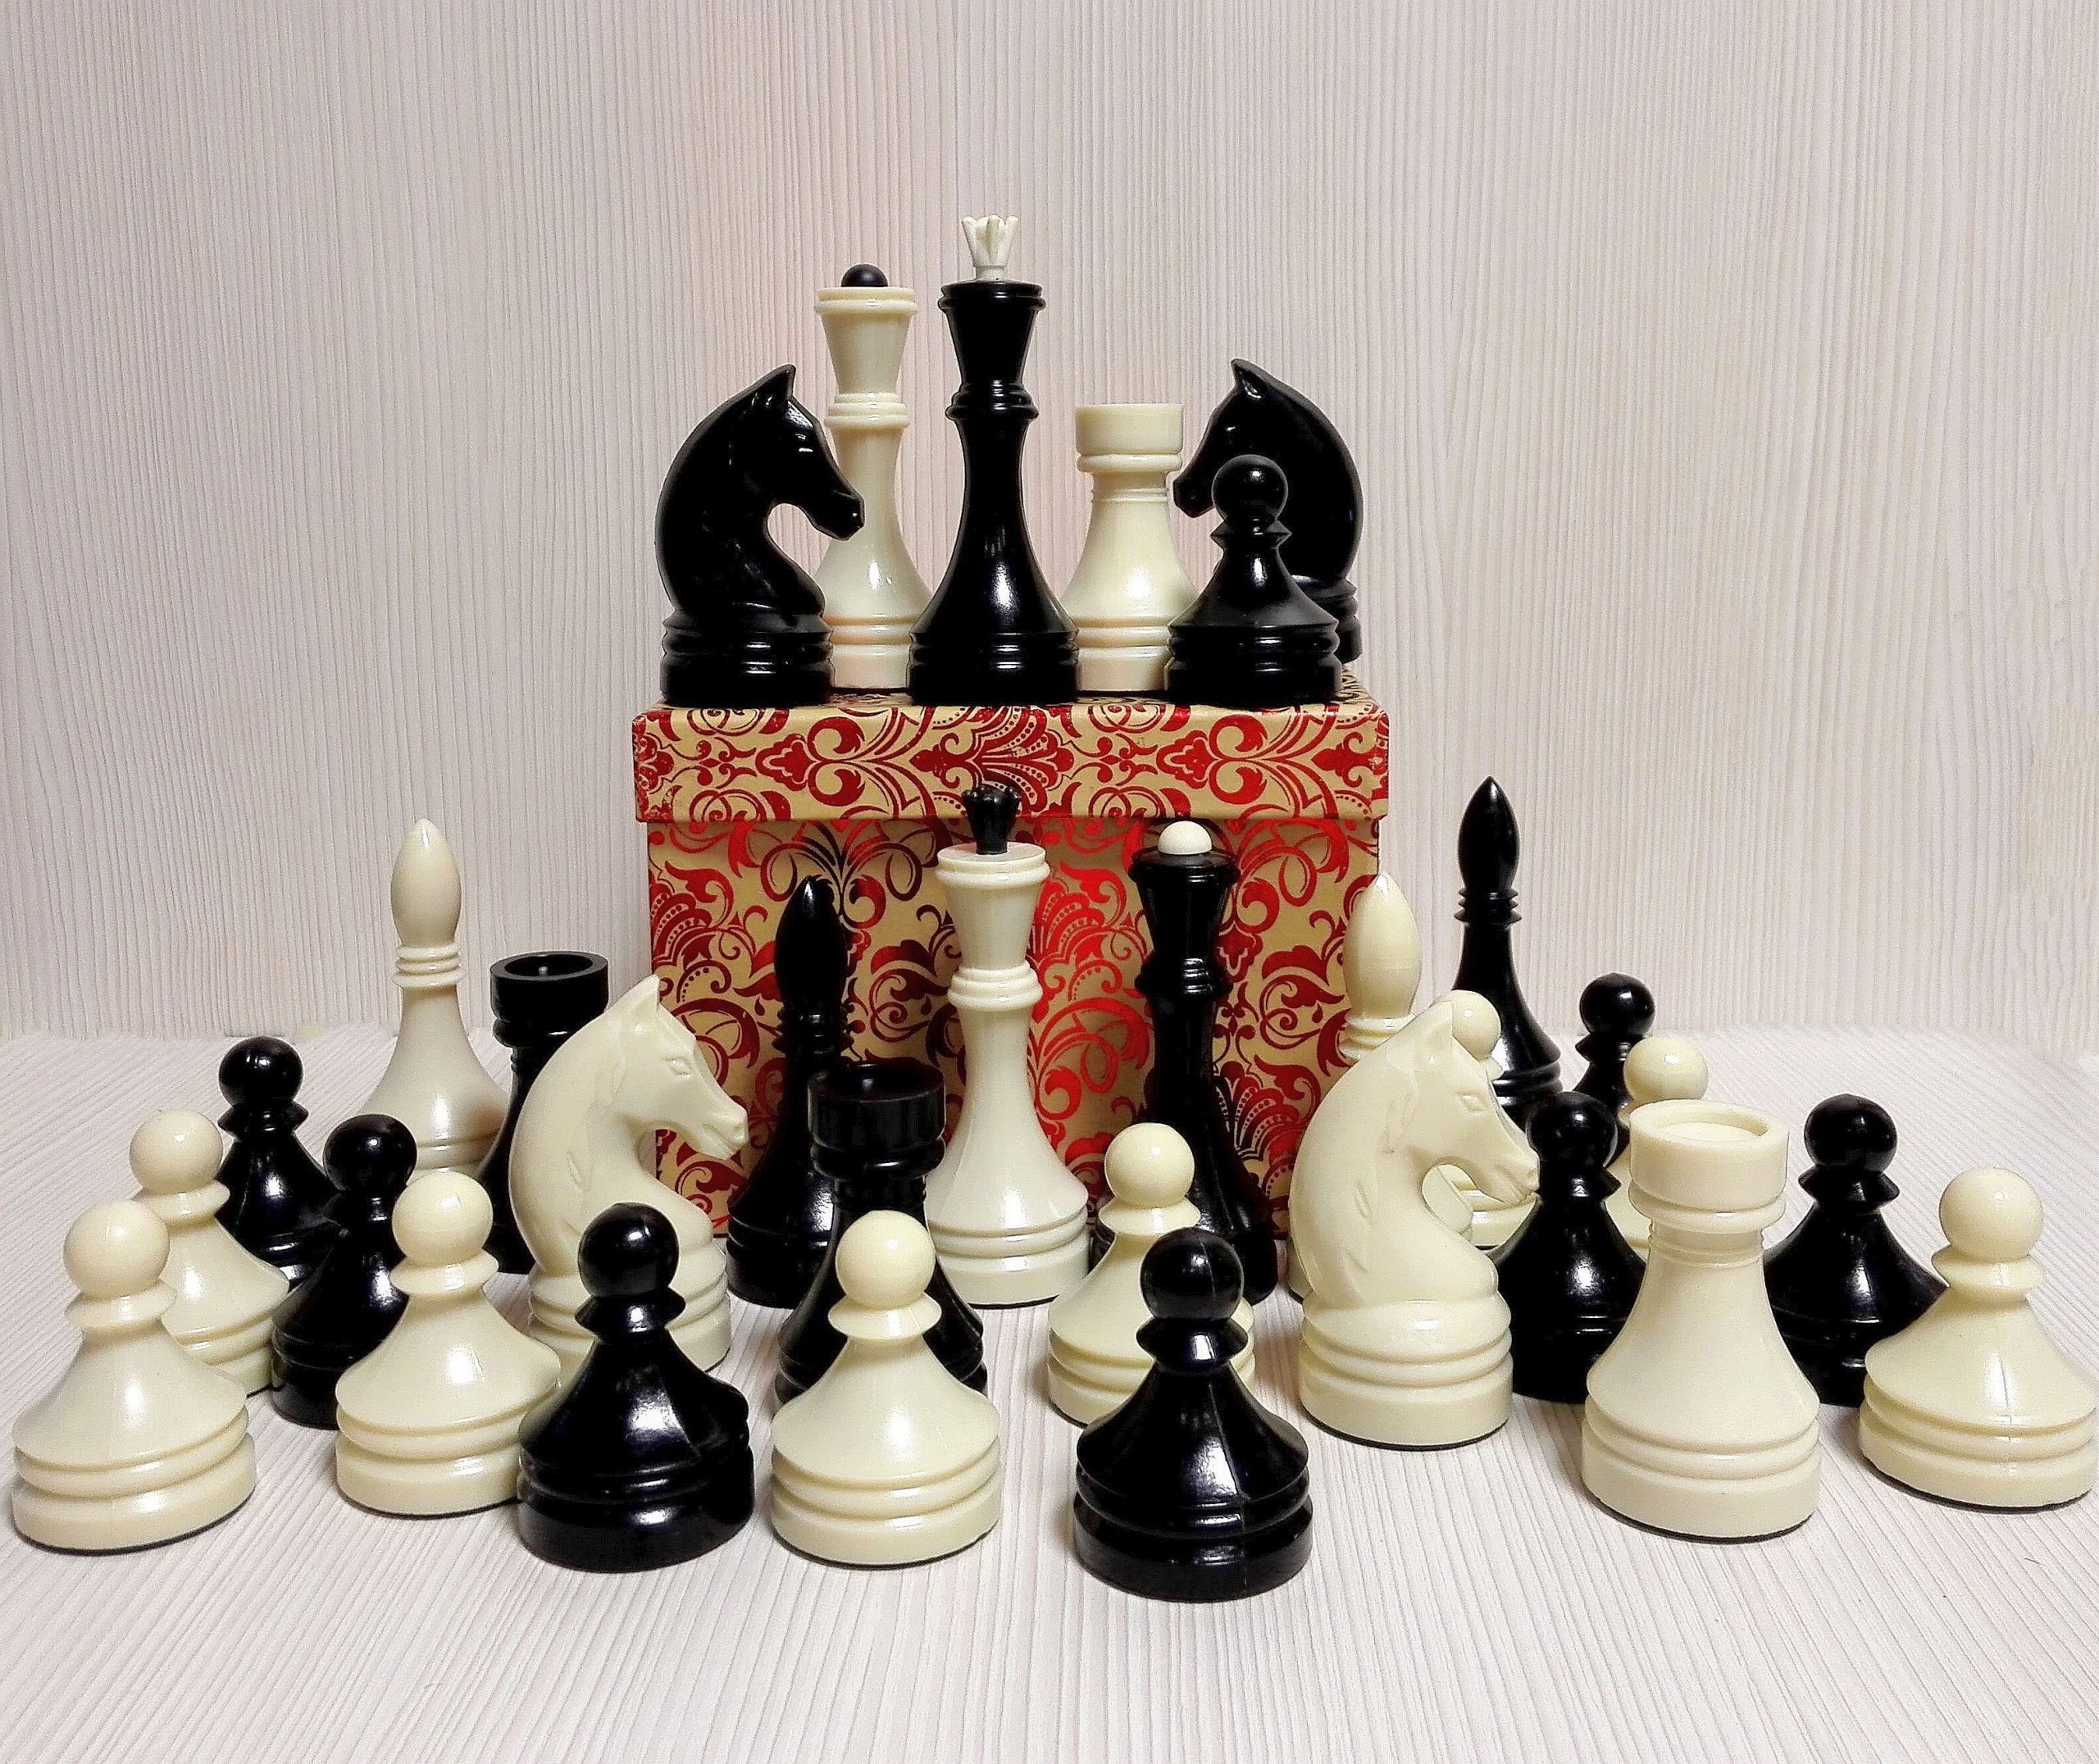 Soviet Vintage Large Chess Pieces.Rare Antique Russian Chess